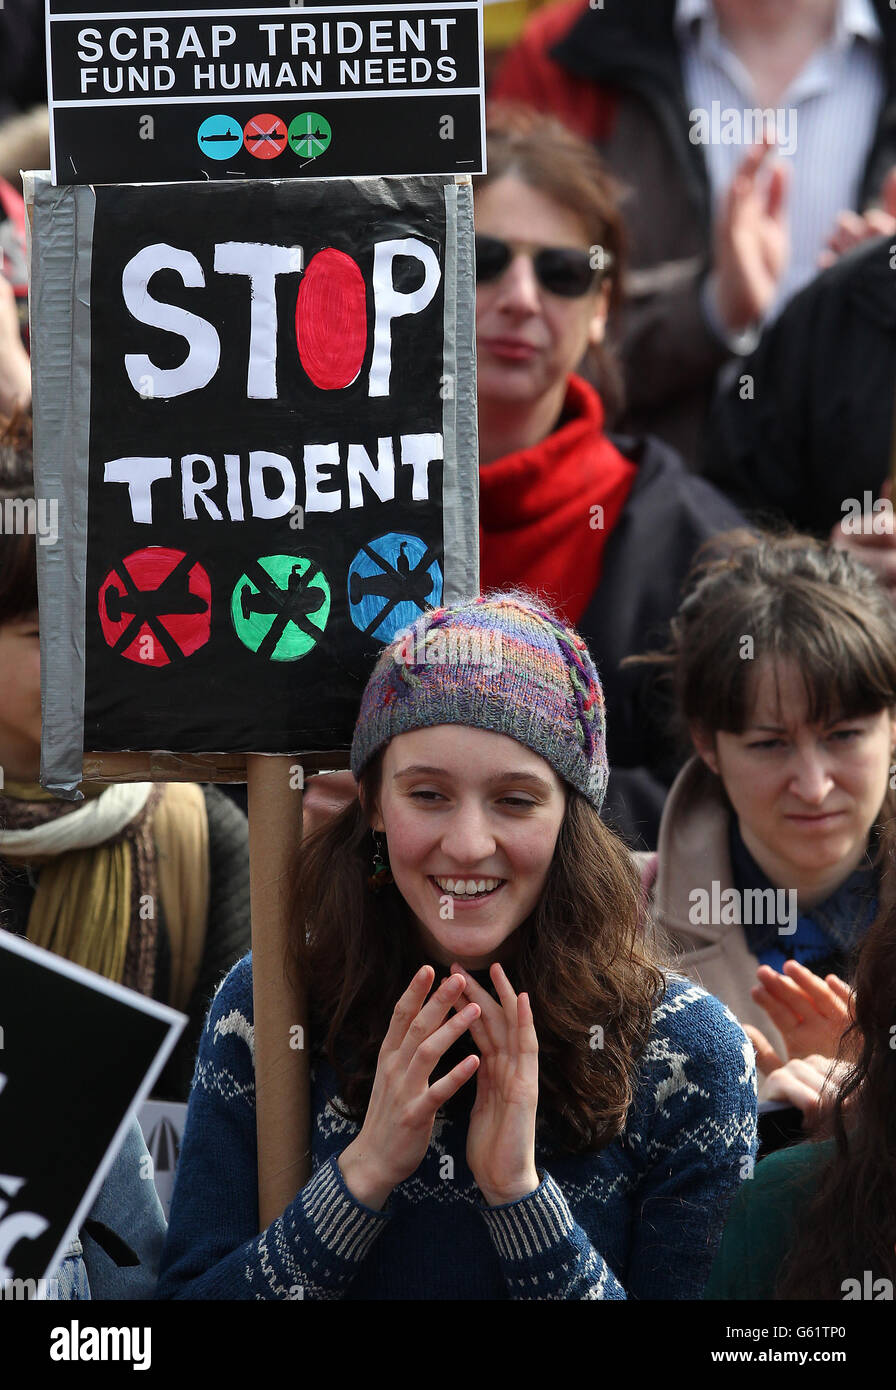 People march through the streets of Glasgow for a Scrap Trident demonstration. MSPs and trade unionists join campaigners to protest against the planned renewal of Trident nuclear weapons. Stock Photo